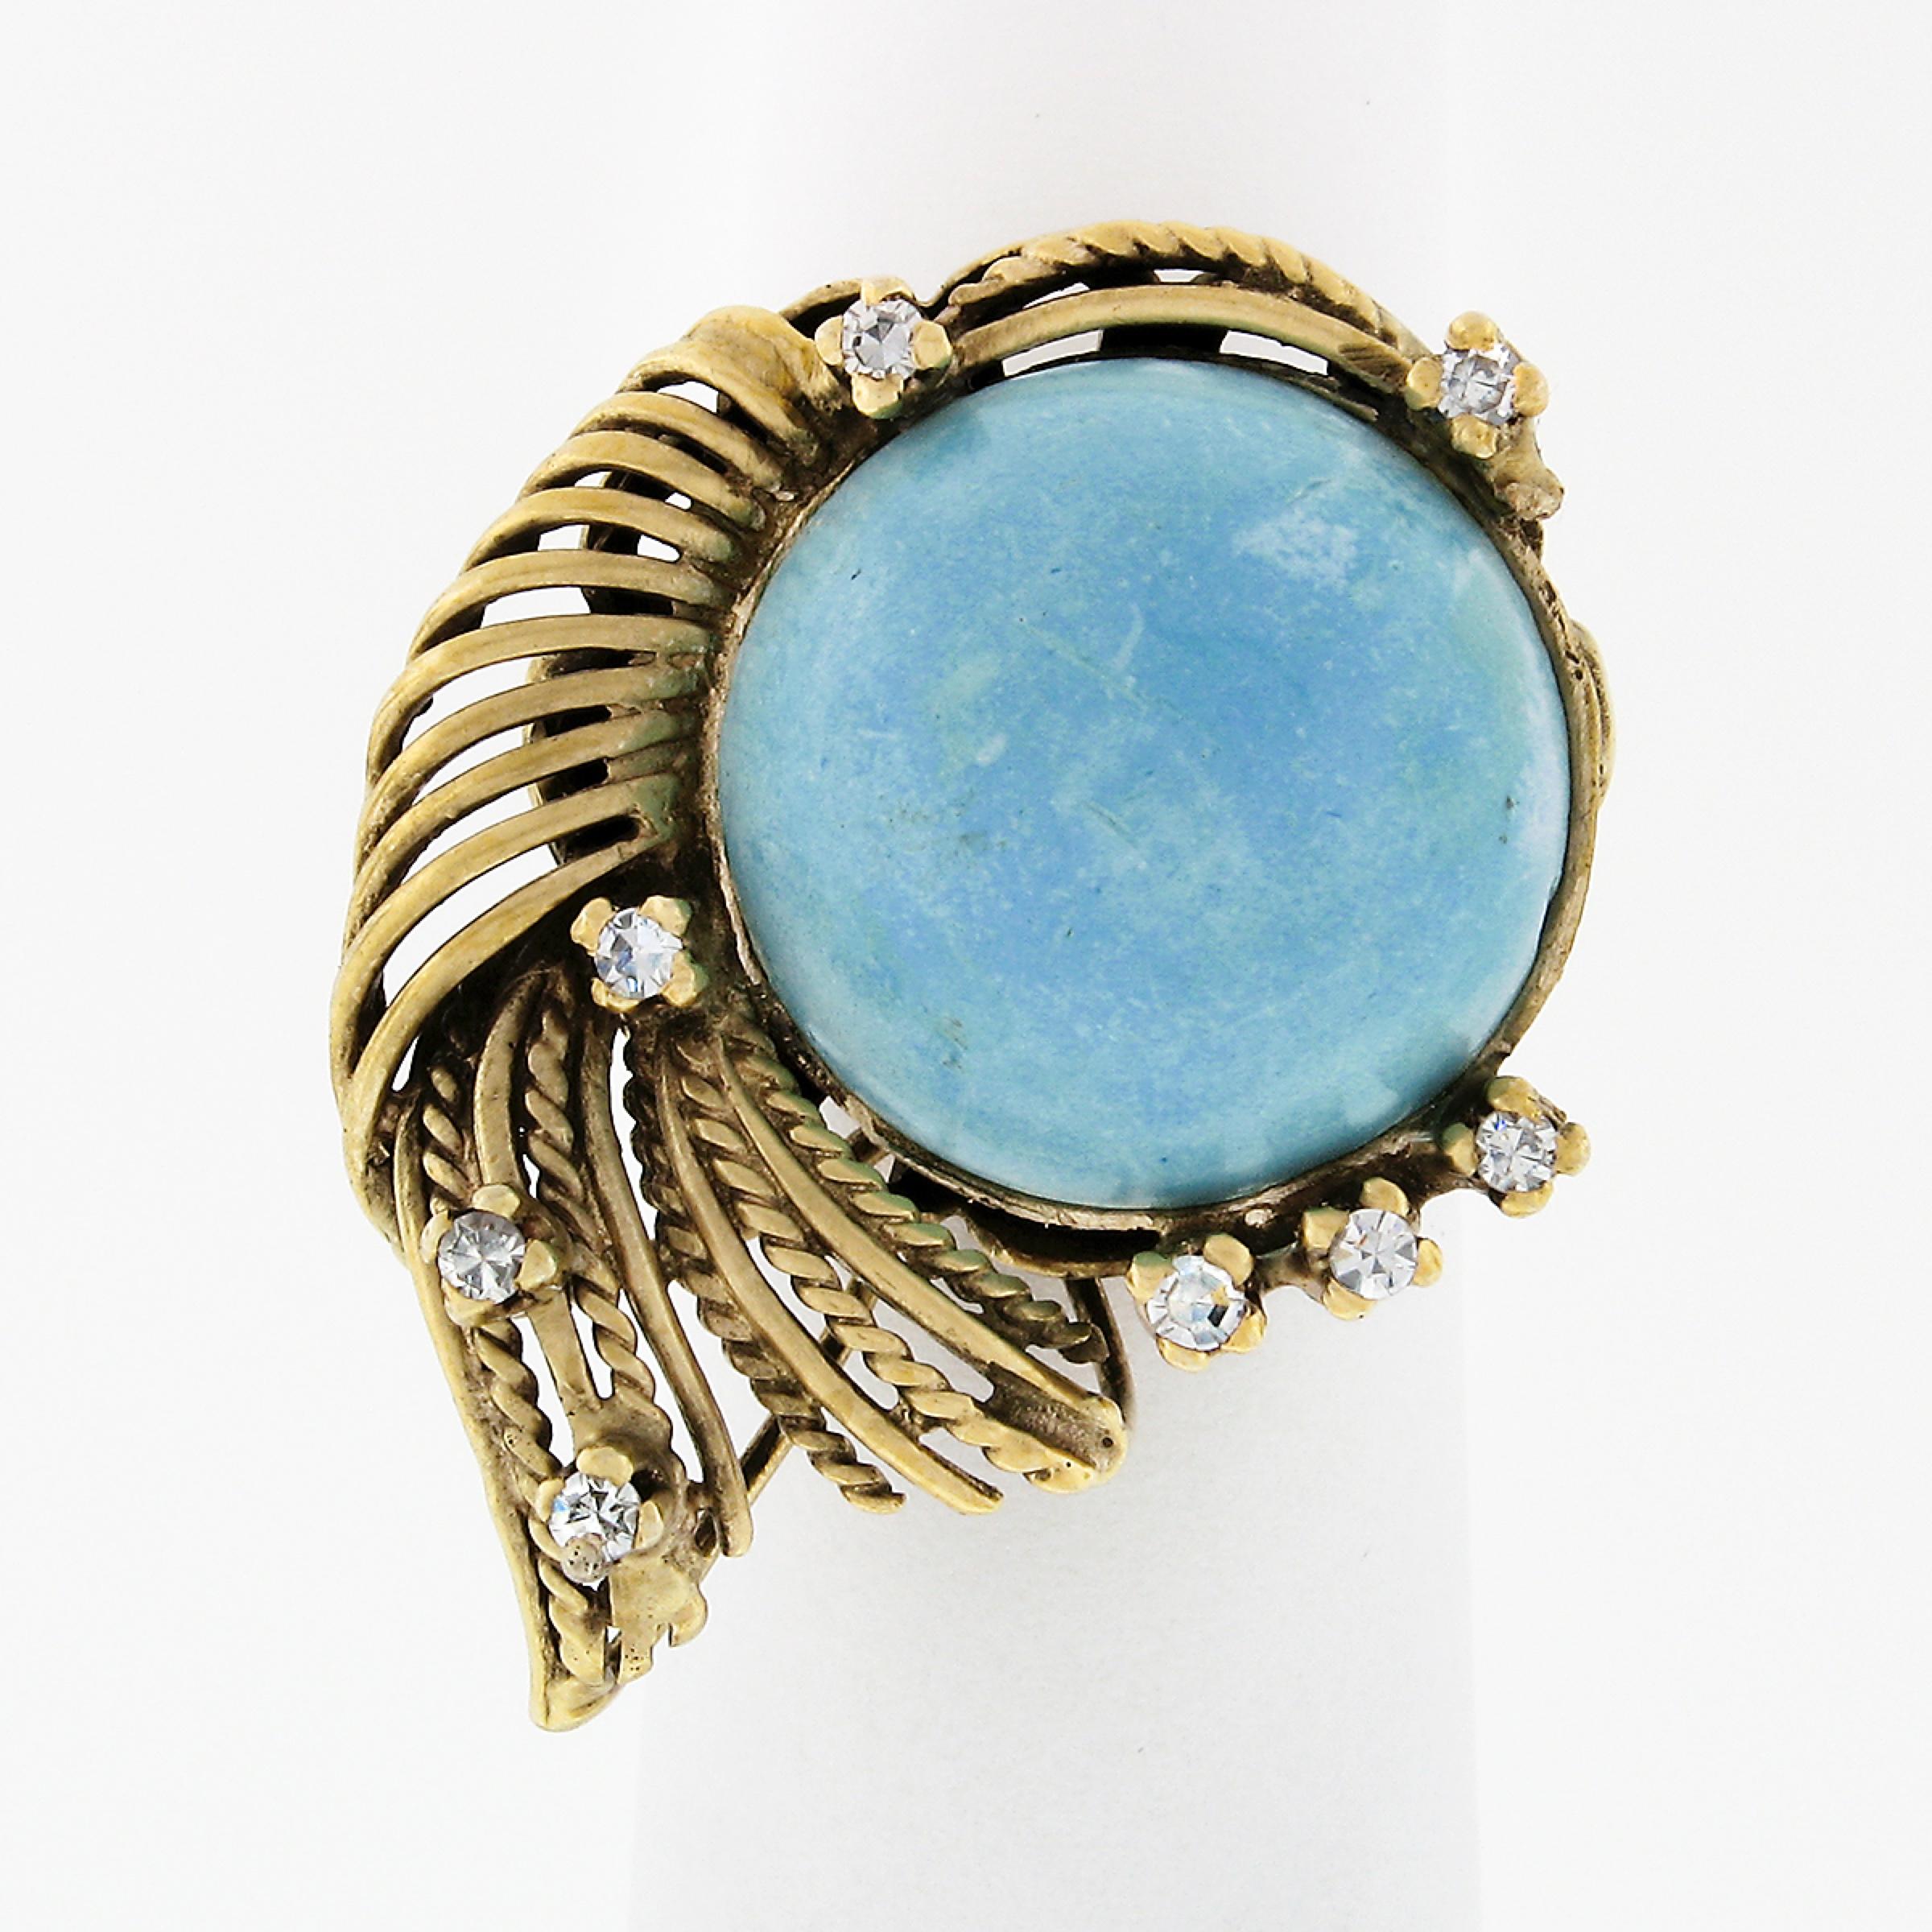 This beautiful vintage cocktail ring is crafted in solid 18k yellow gold and features a large turquoise stone neatly set at the top of the open basket. The stone displays a super attractive color and size and is surrounded by absolutely gorgeous